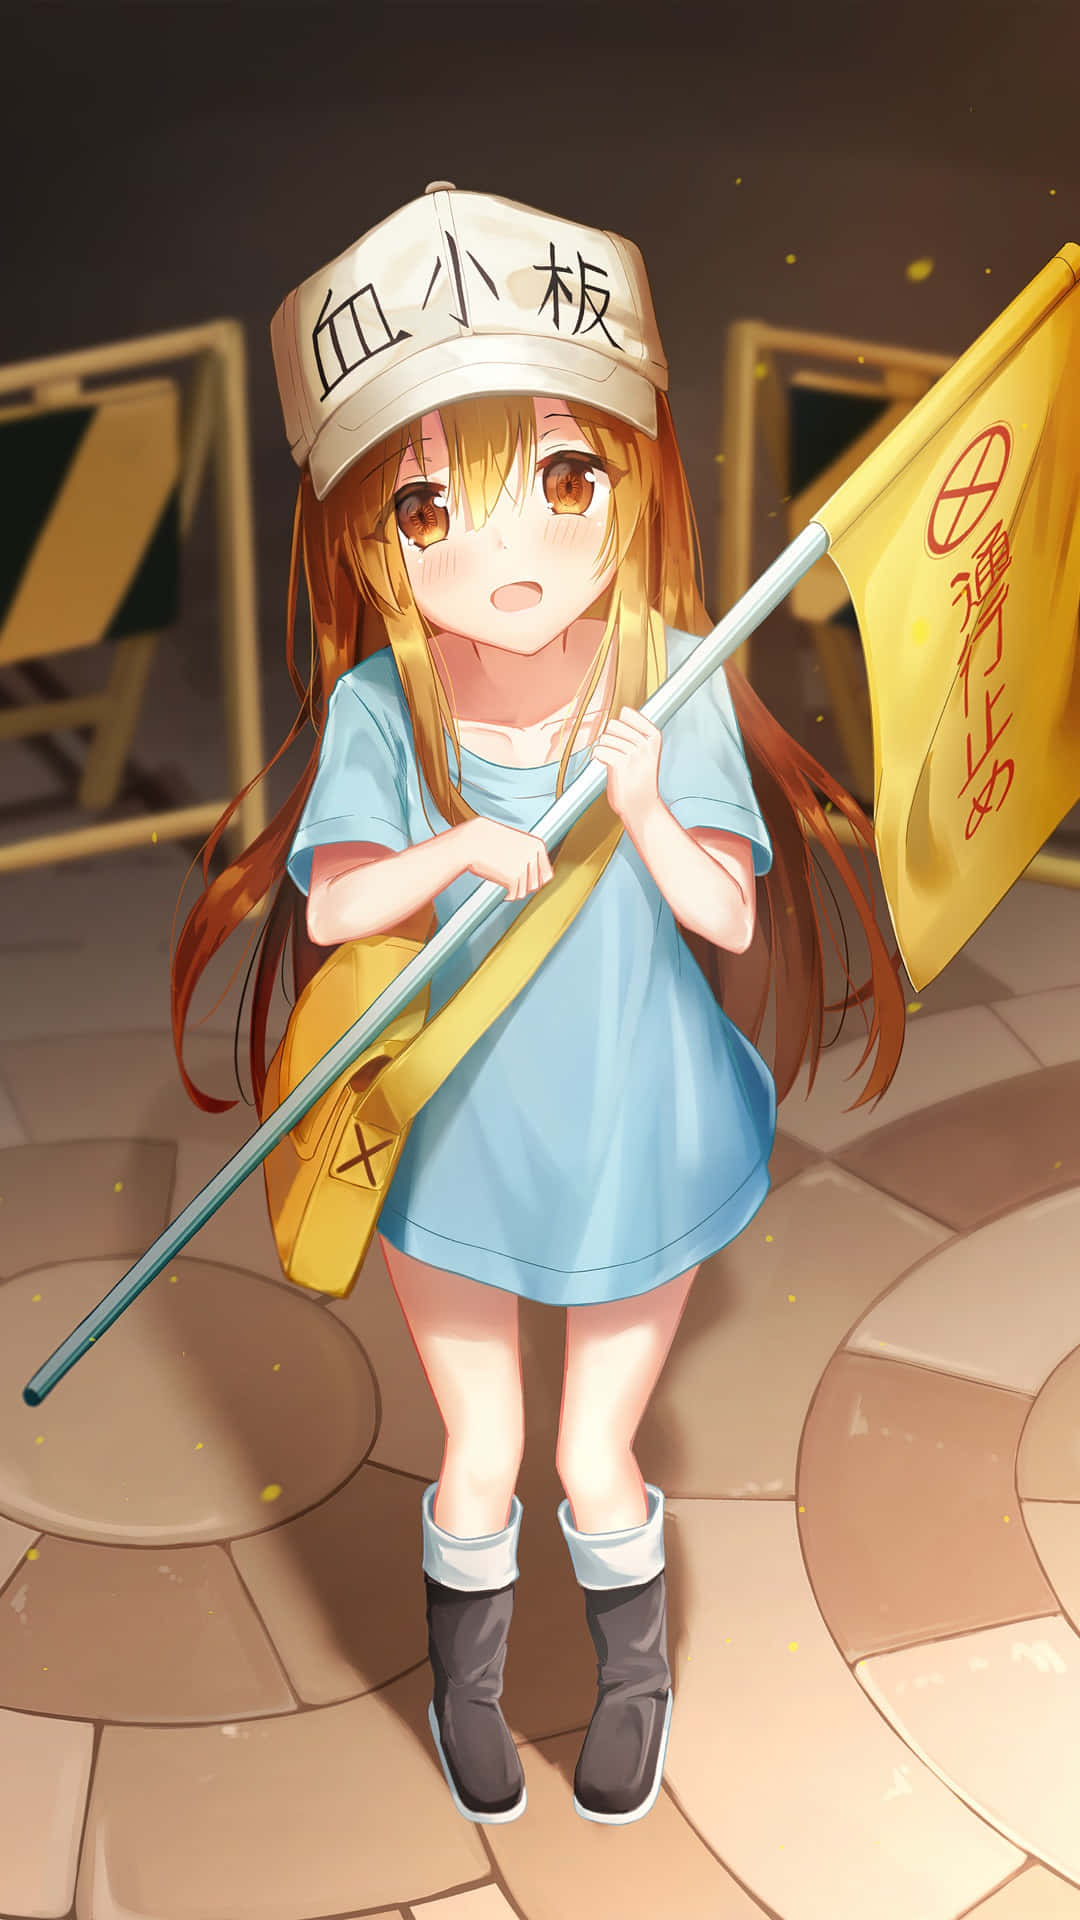 A Cute Cluster Of Cells At Work Platelets Wallpaper